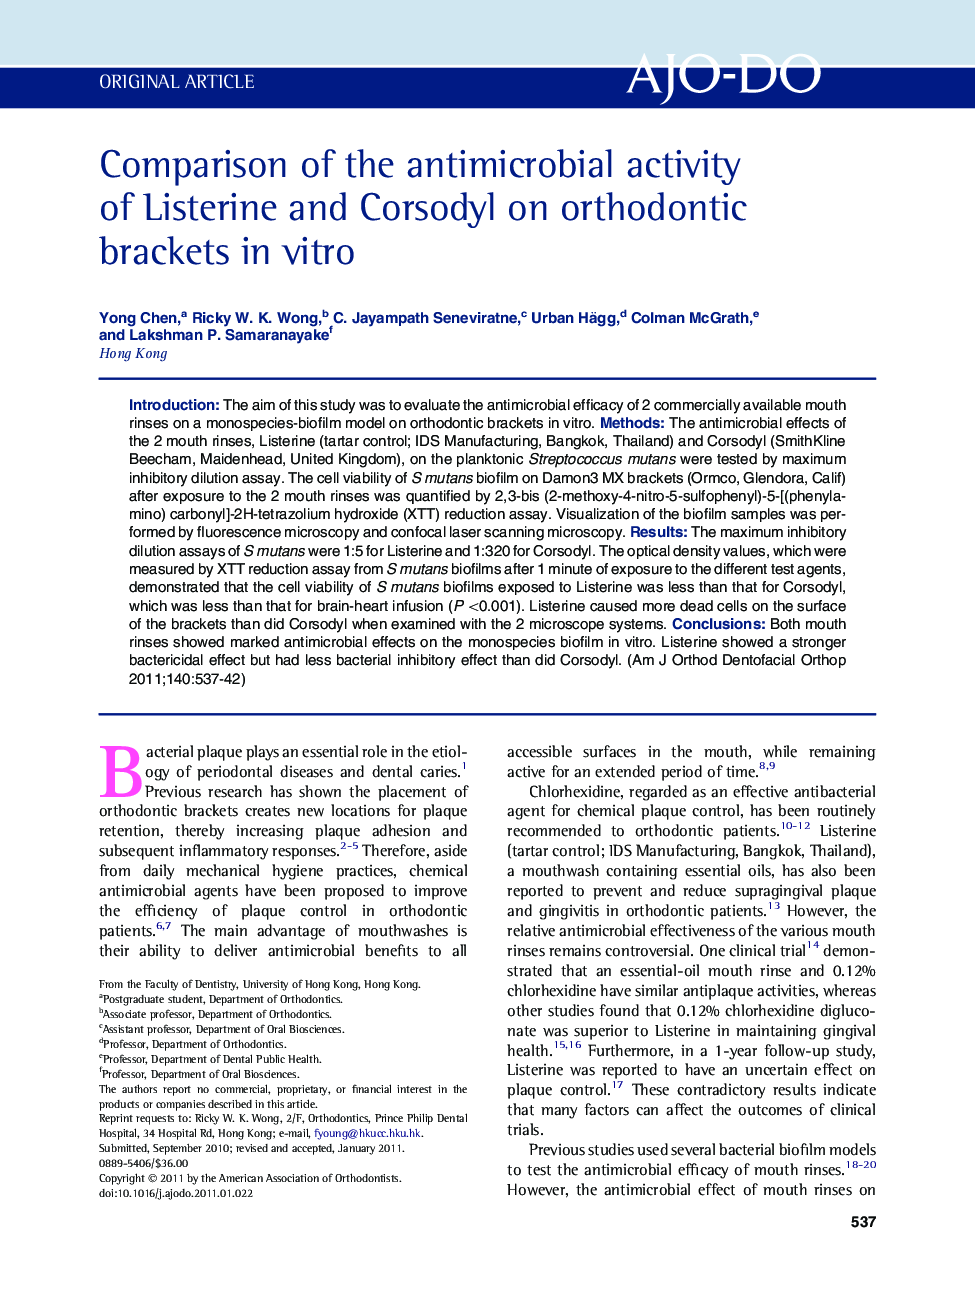 Comparison of the antimicrobial activity of Listerine and Corsodyl on orthodontic brackets in vitro 